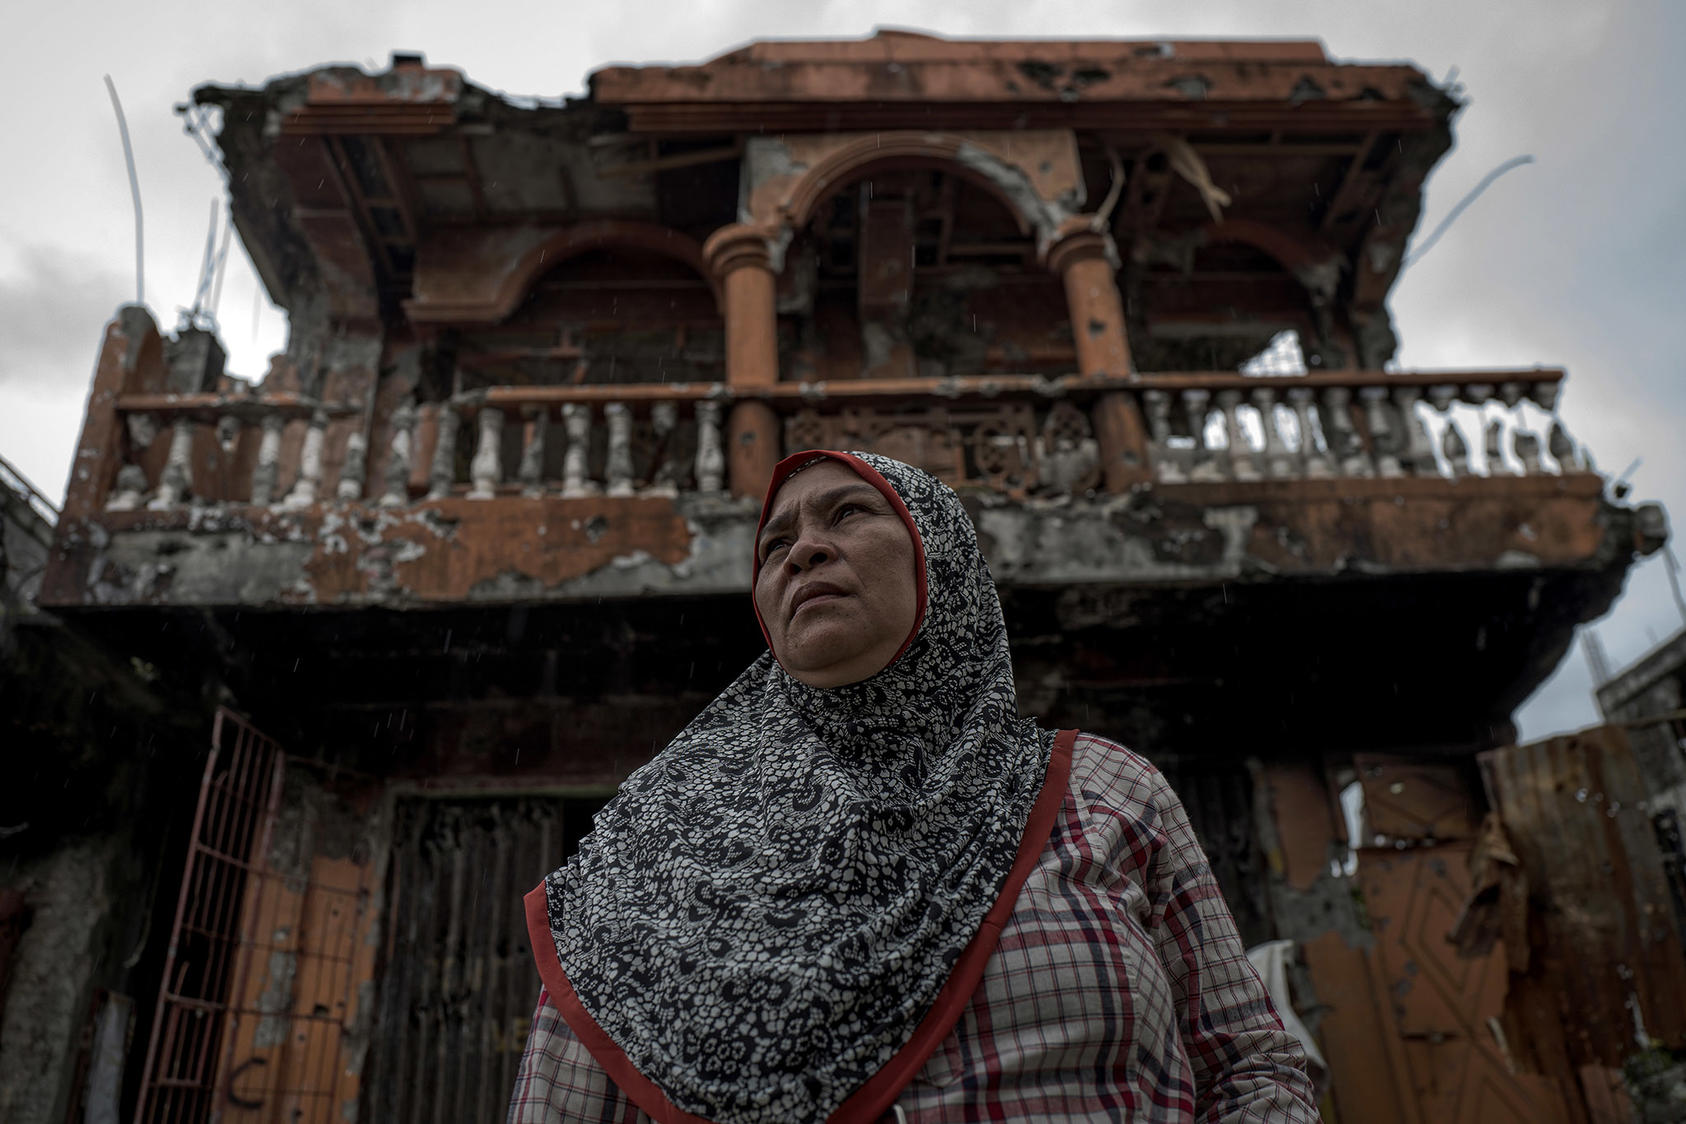 Lenang Cali stands in front of the wreckage of her home and bakery shop during a brief return to Marawi, in the southern Philippines. April 8, 2018. (Jes Aznar/The New York Times)